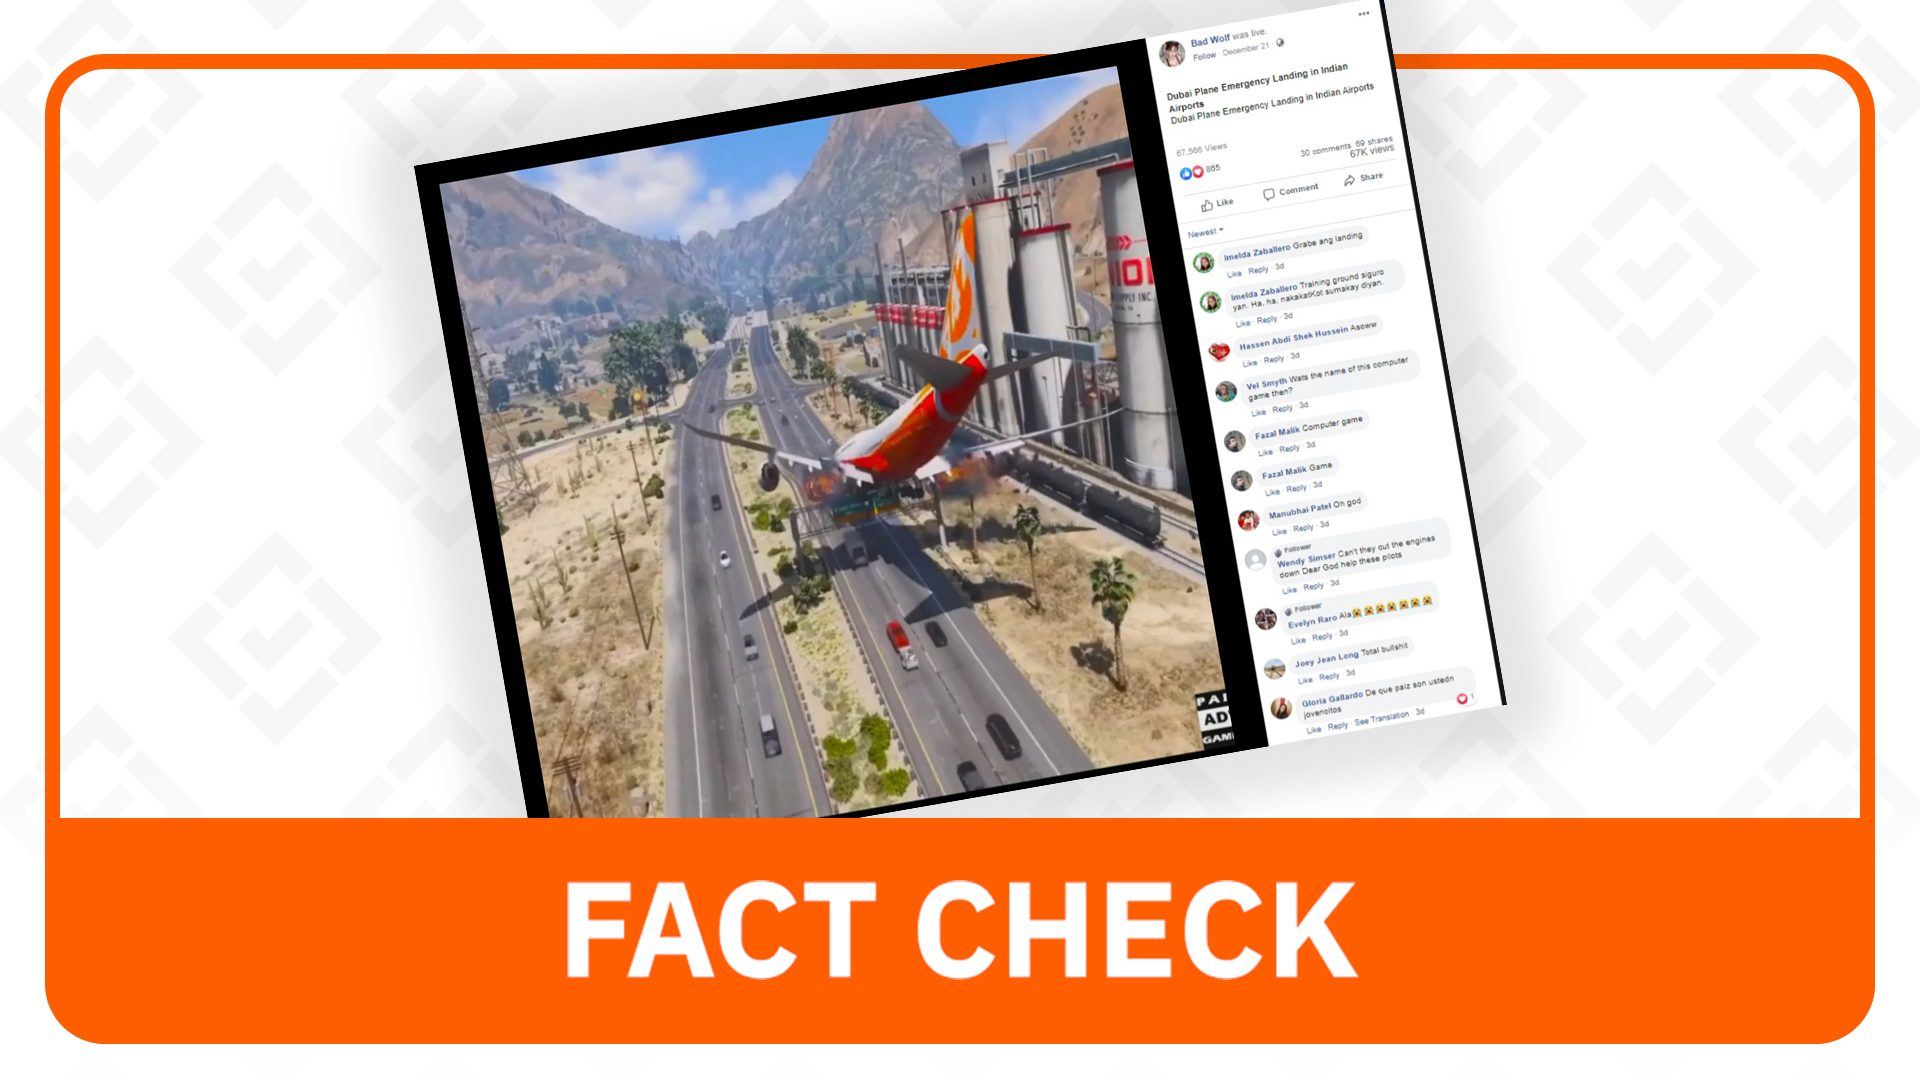 FACT CHECK: Video of plane emergency landing is just a game